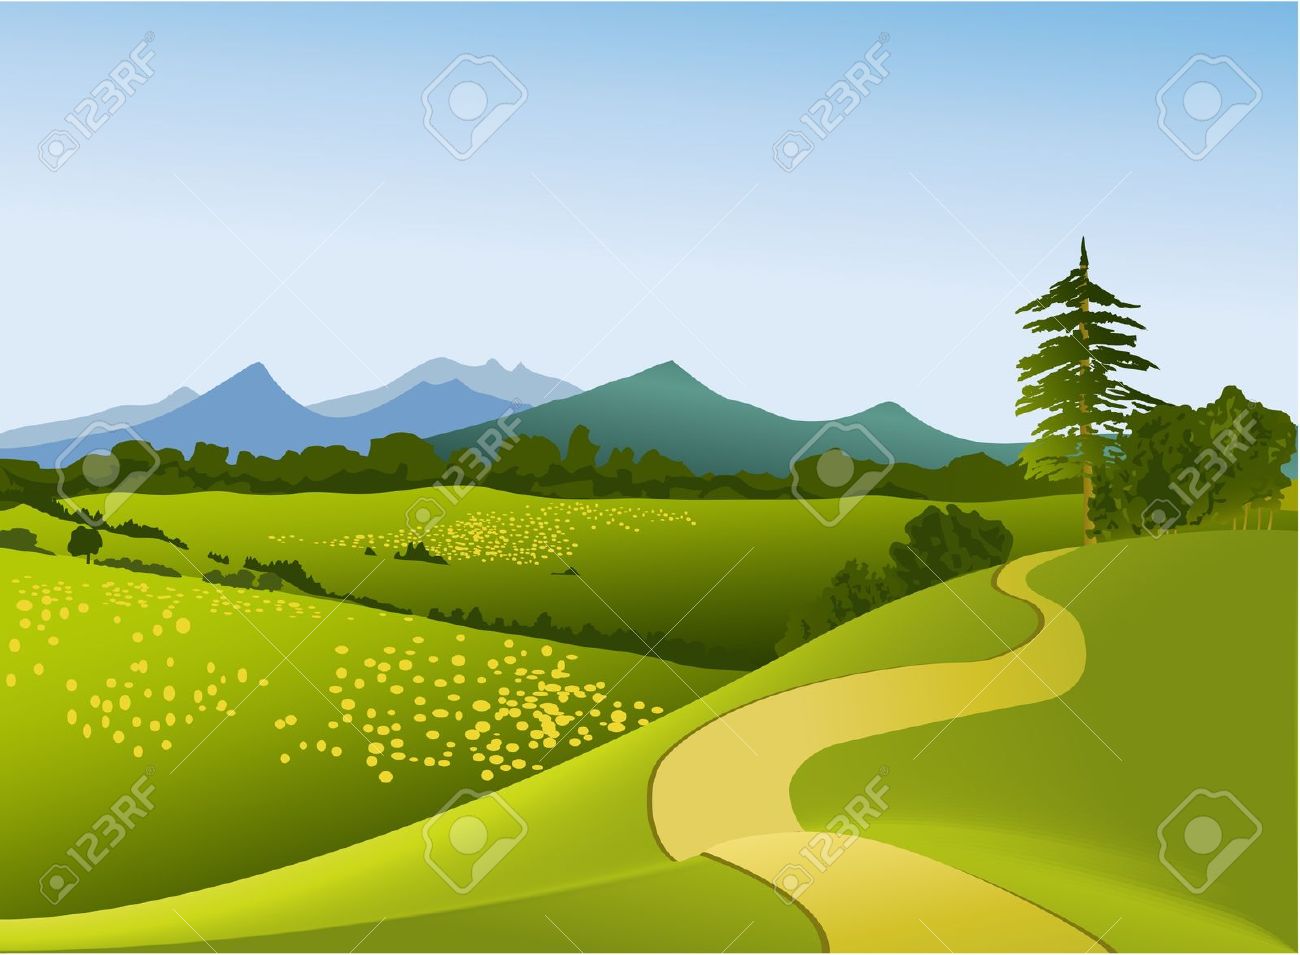 Mountain road clipart.